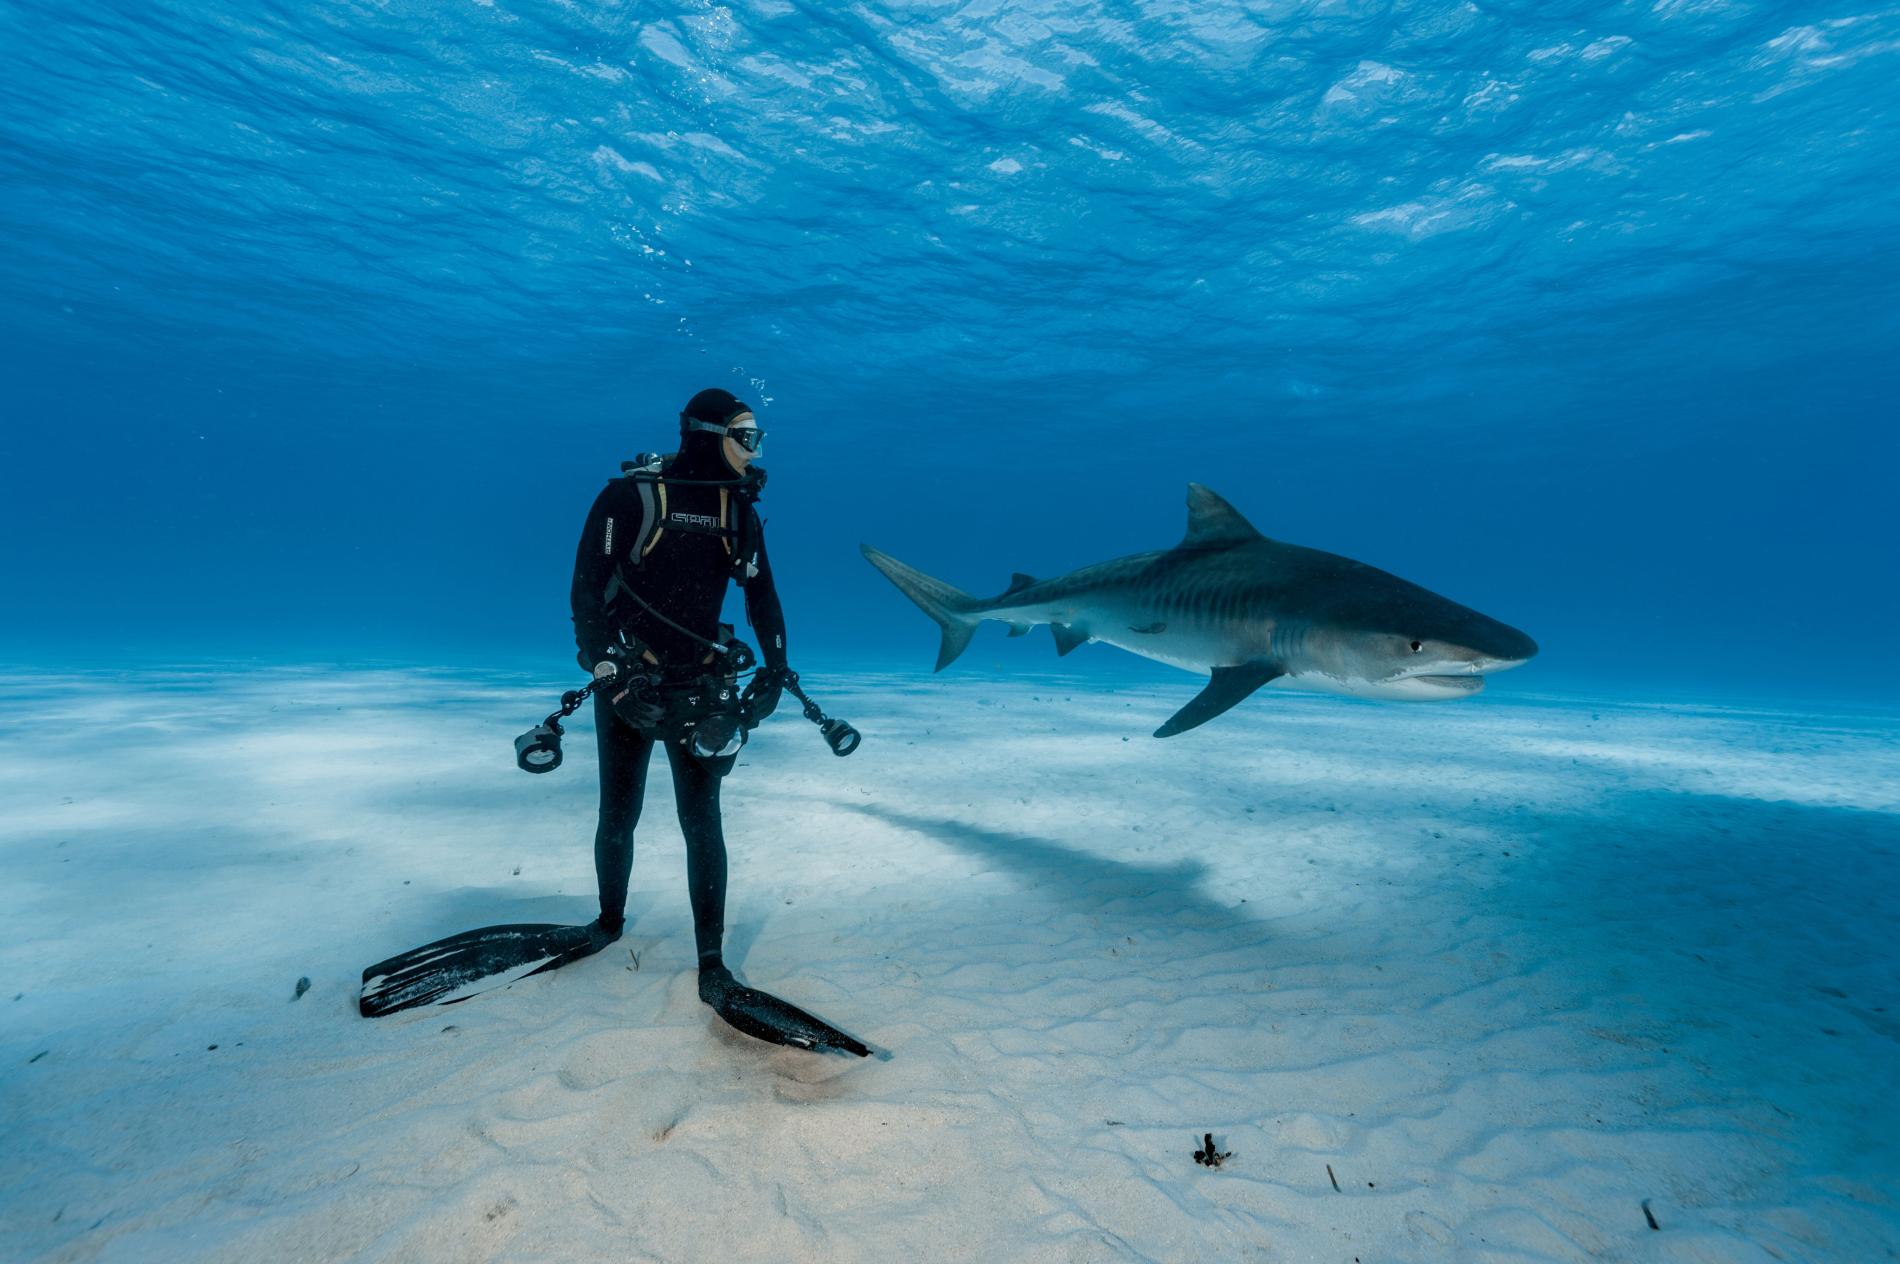 PHOTOGRAPH BY BRIAN SKERRY